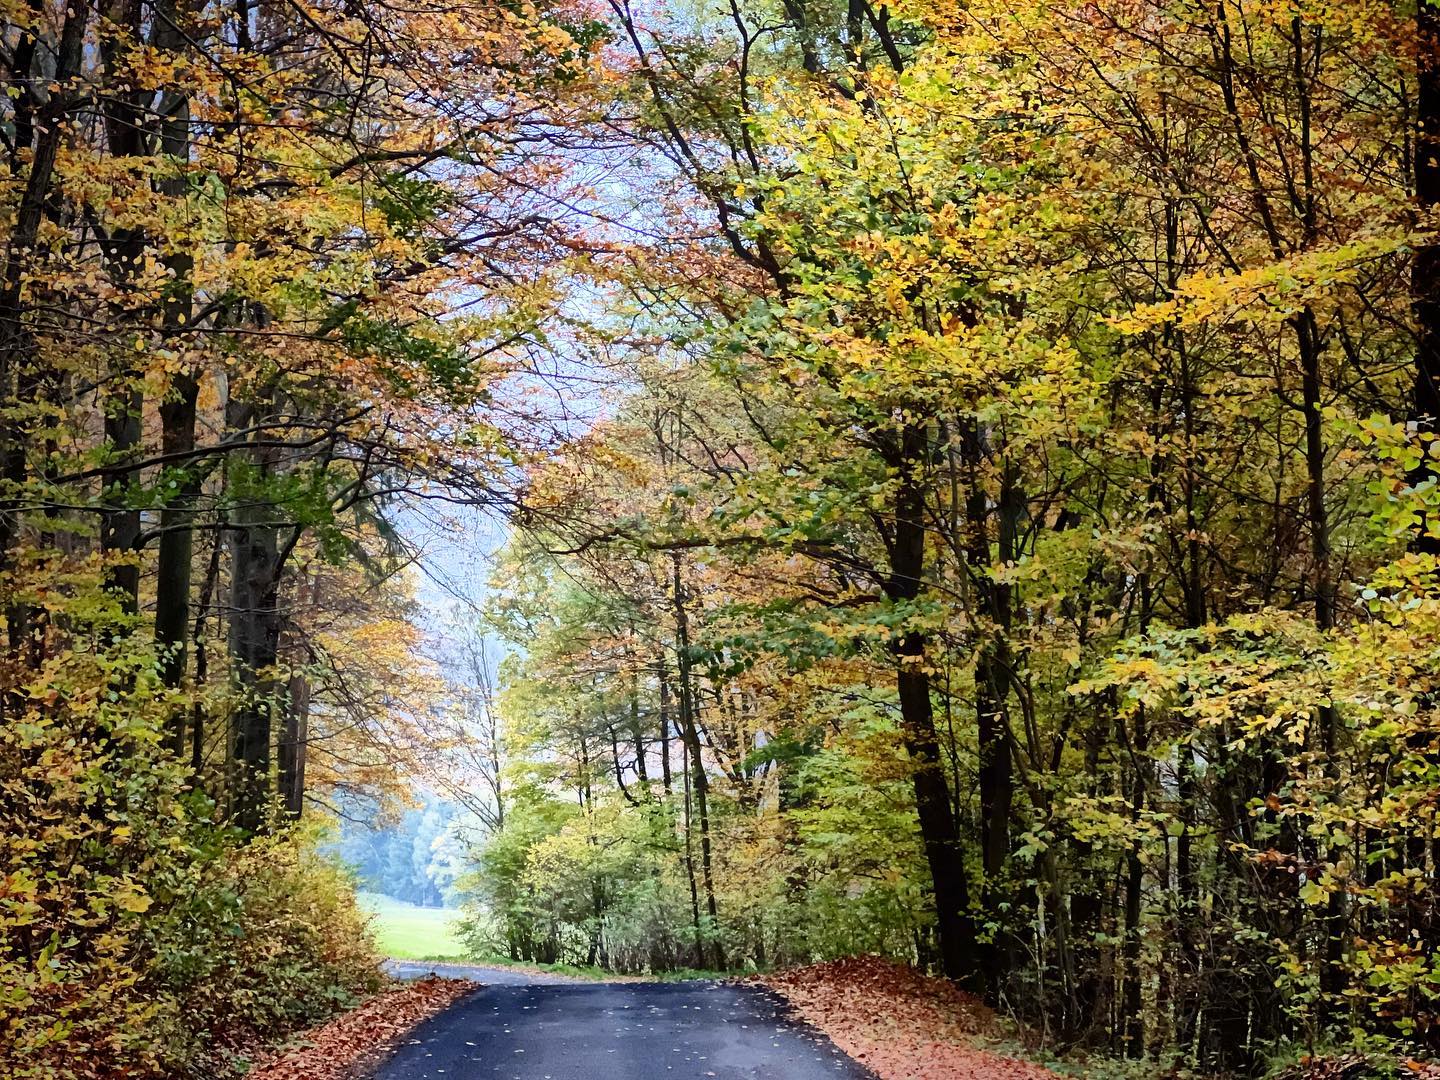 fantastic #colors of #autumn over a #road in the #mozntains of #moravia #czechrepublic #iphone13pro #landscape #landscapephotography